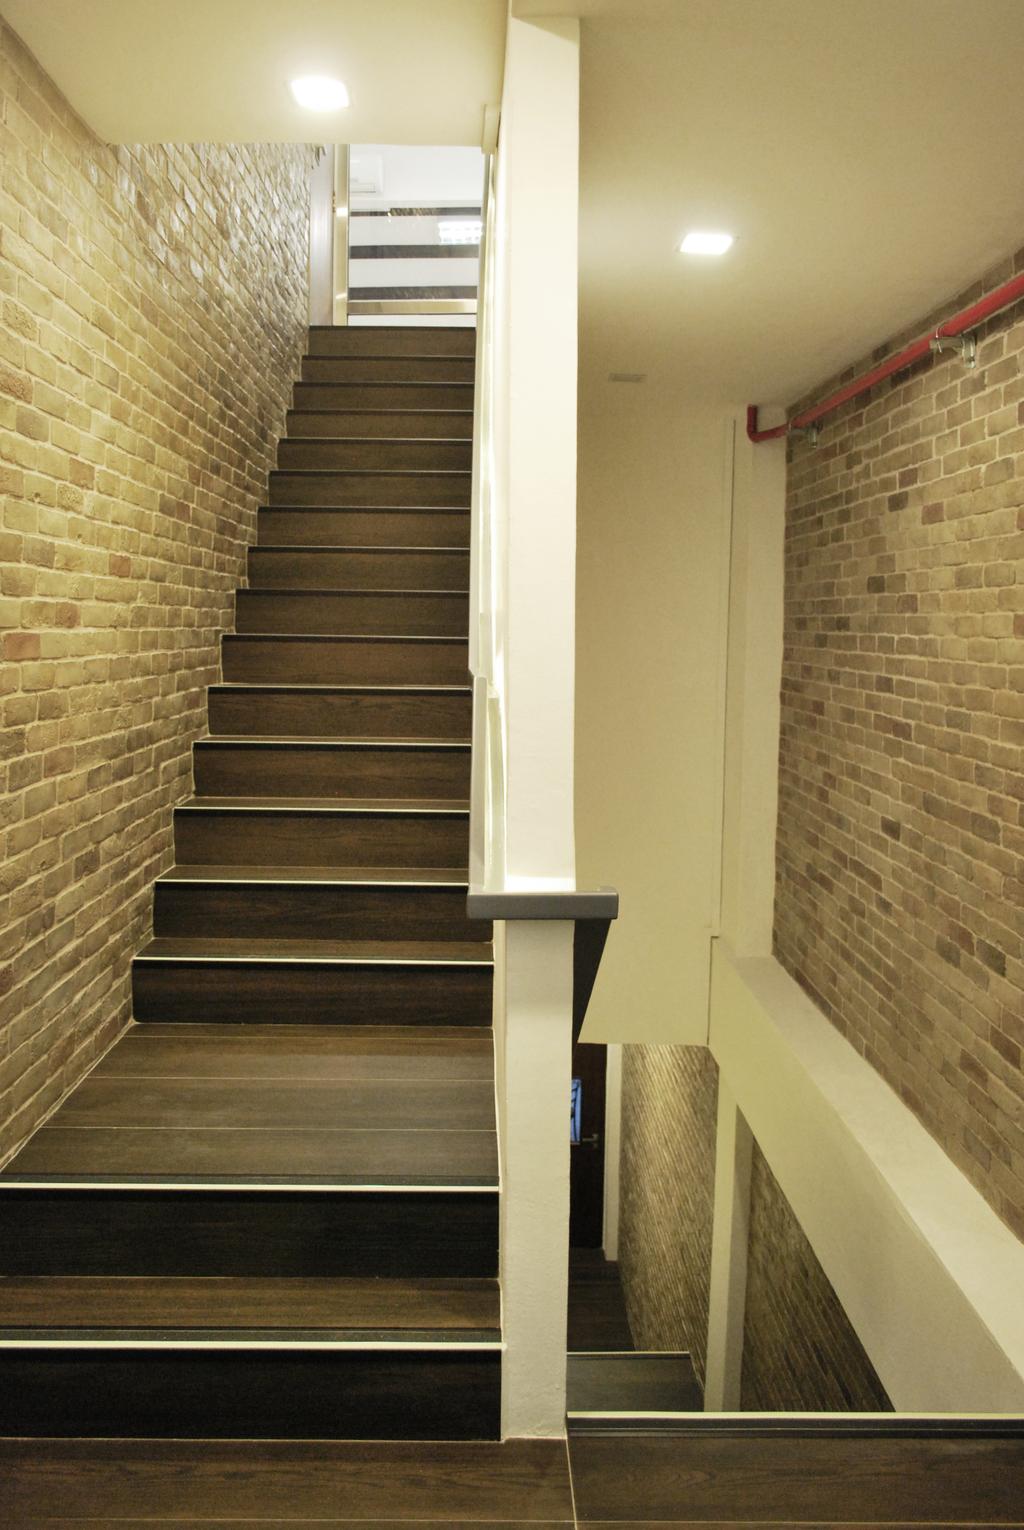 198 Office, Commercial, Architect, Czarl Architects, Transitional, Stairs, Staircase, Brick Wall